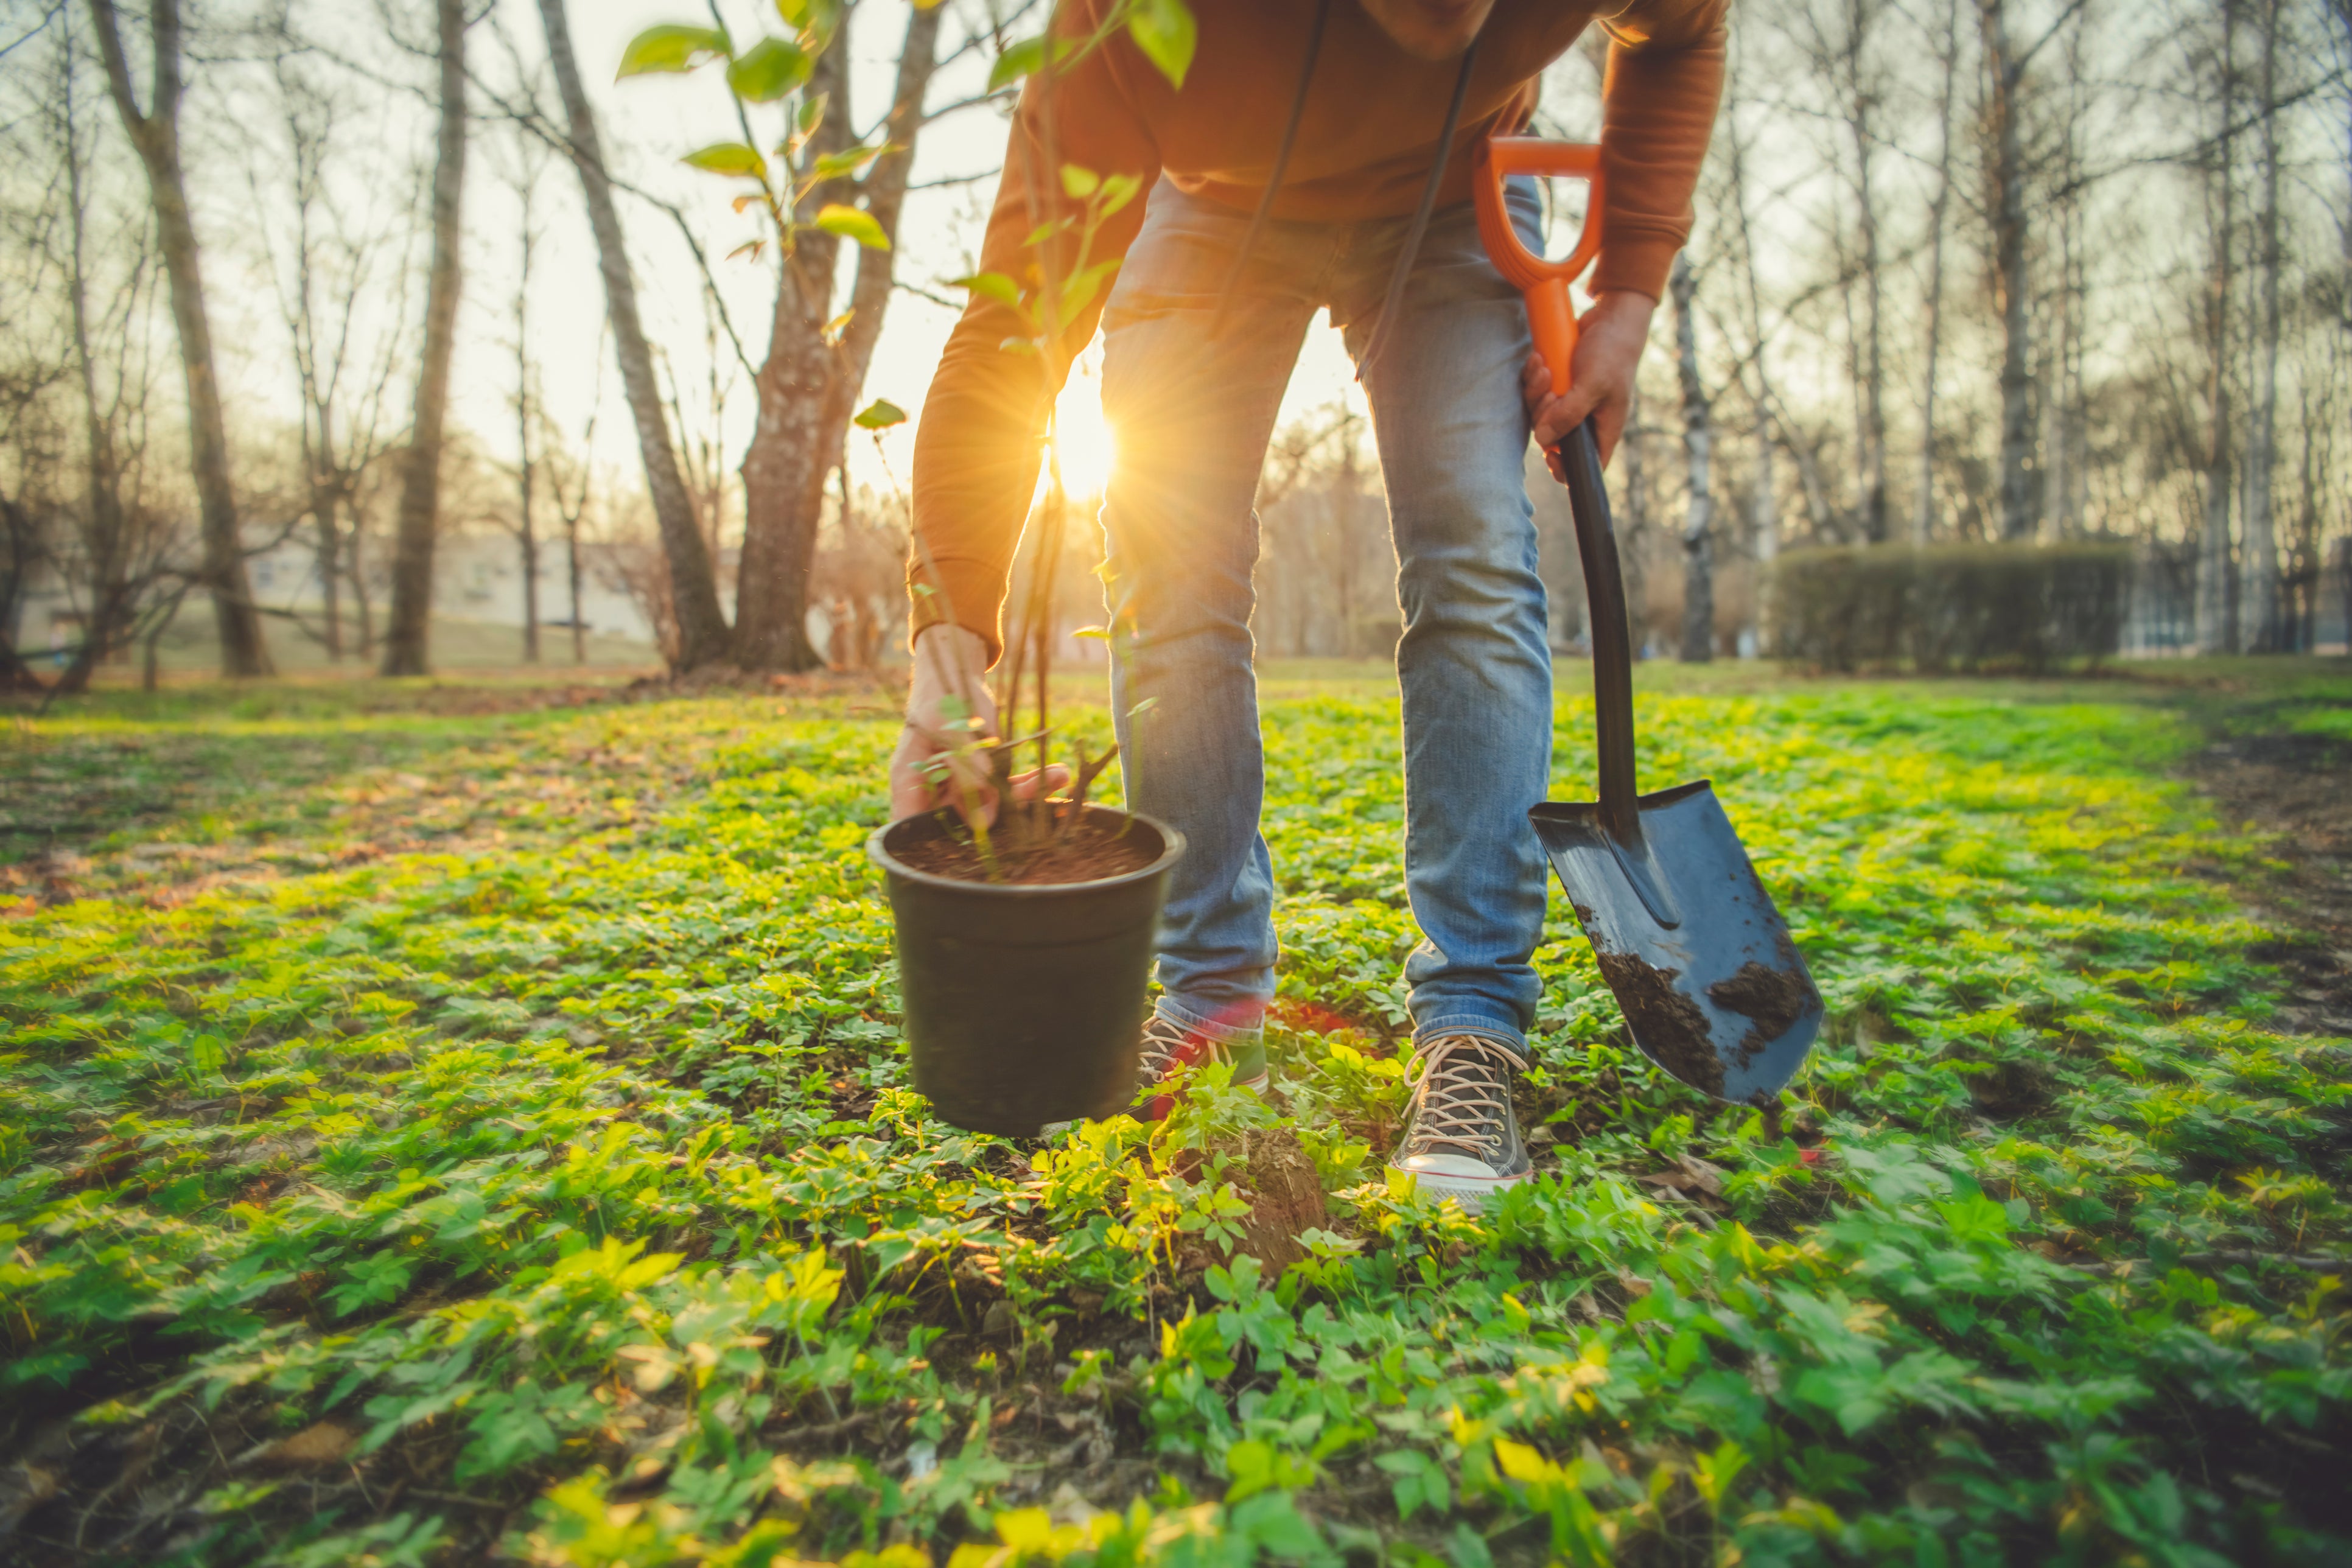 Just 1.3 million trees planted between April and September